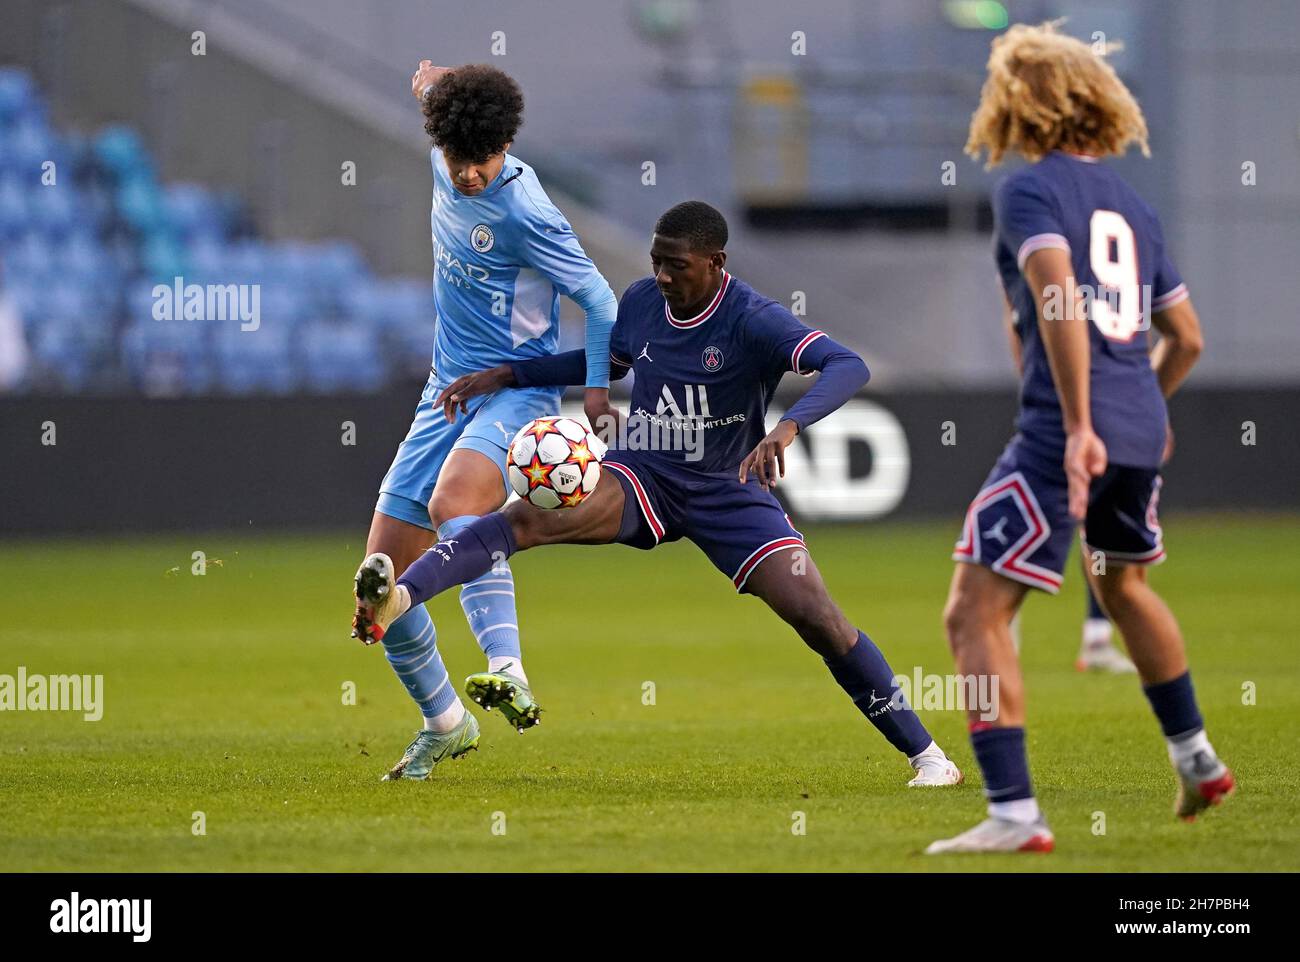 Manchester City's Nico O'Reilly (left) and Paris Saint Germain's Ayman Kari battle for the ball during the UEFA Youth League, Group A match at the Manchester City Academy Stadium, Manchester. Picture date: Wednesday November 24, 2021. Stock Photo